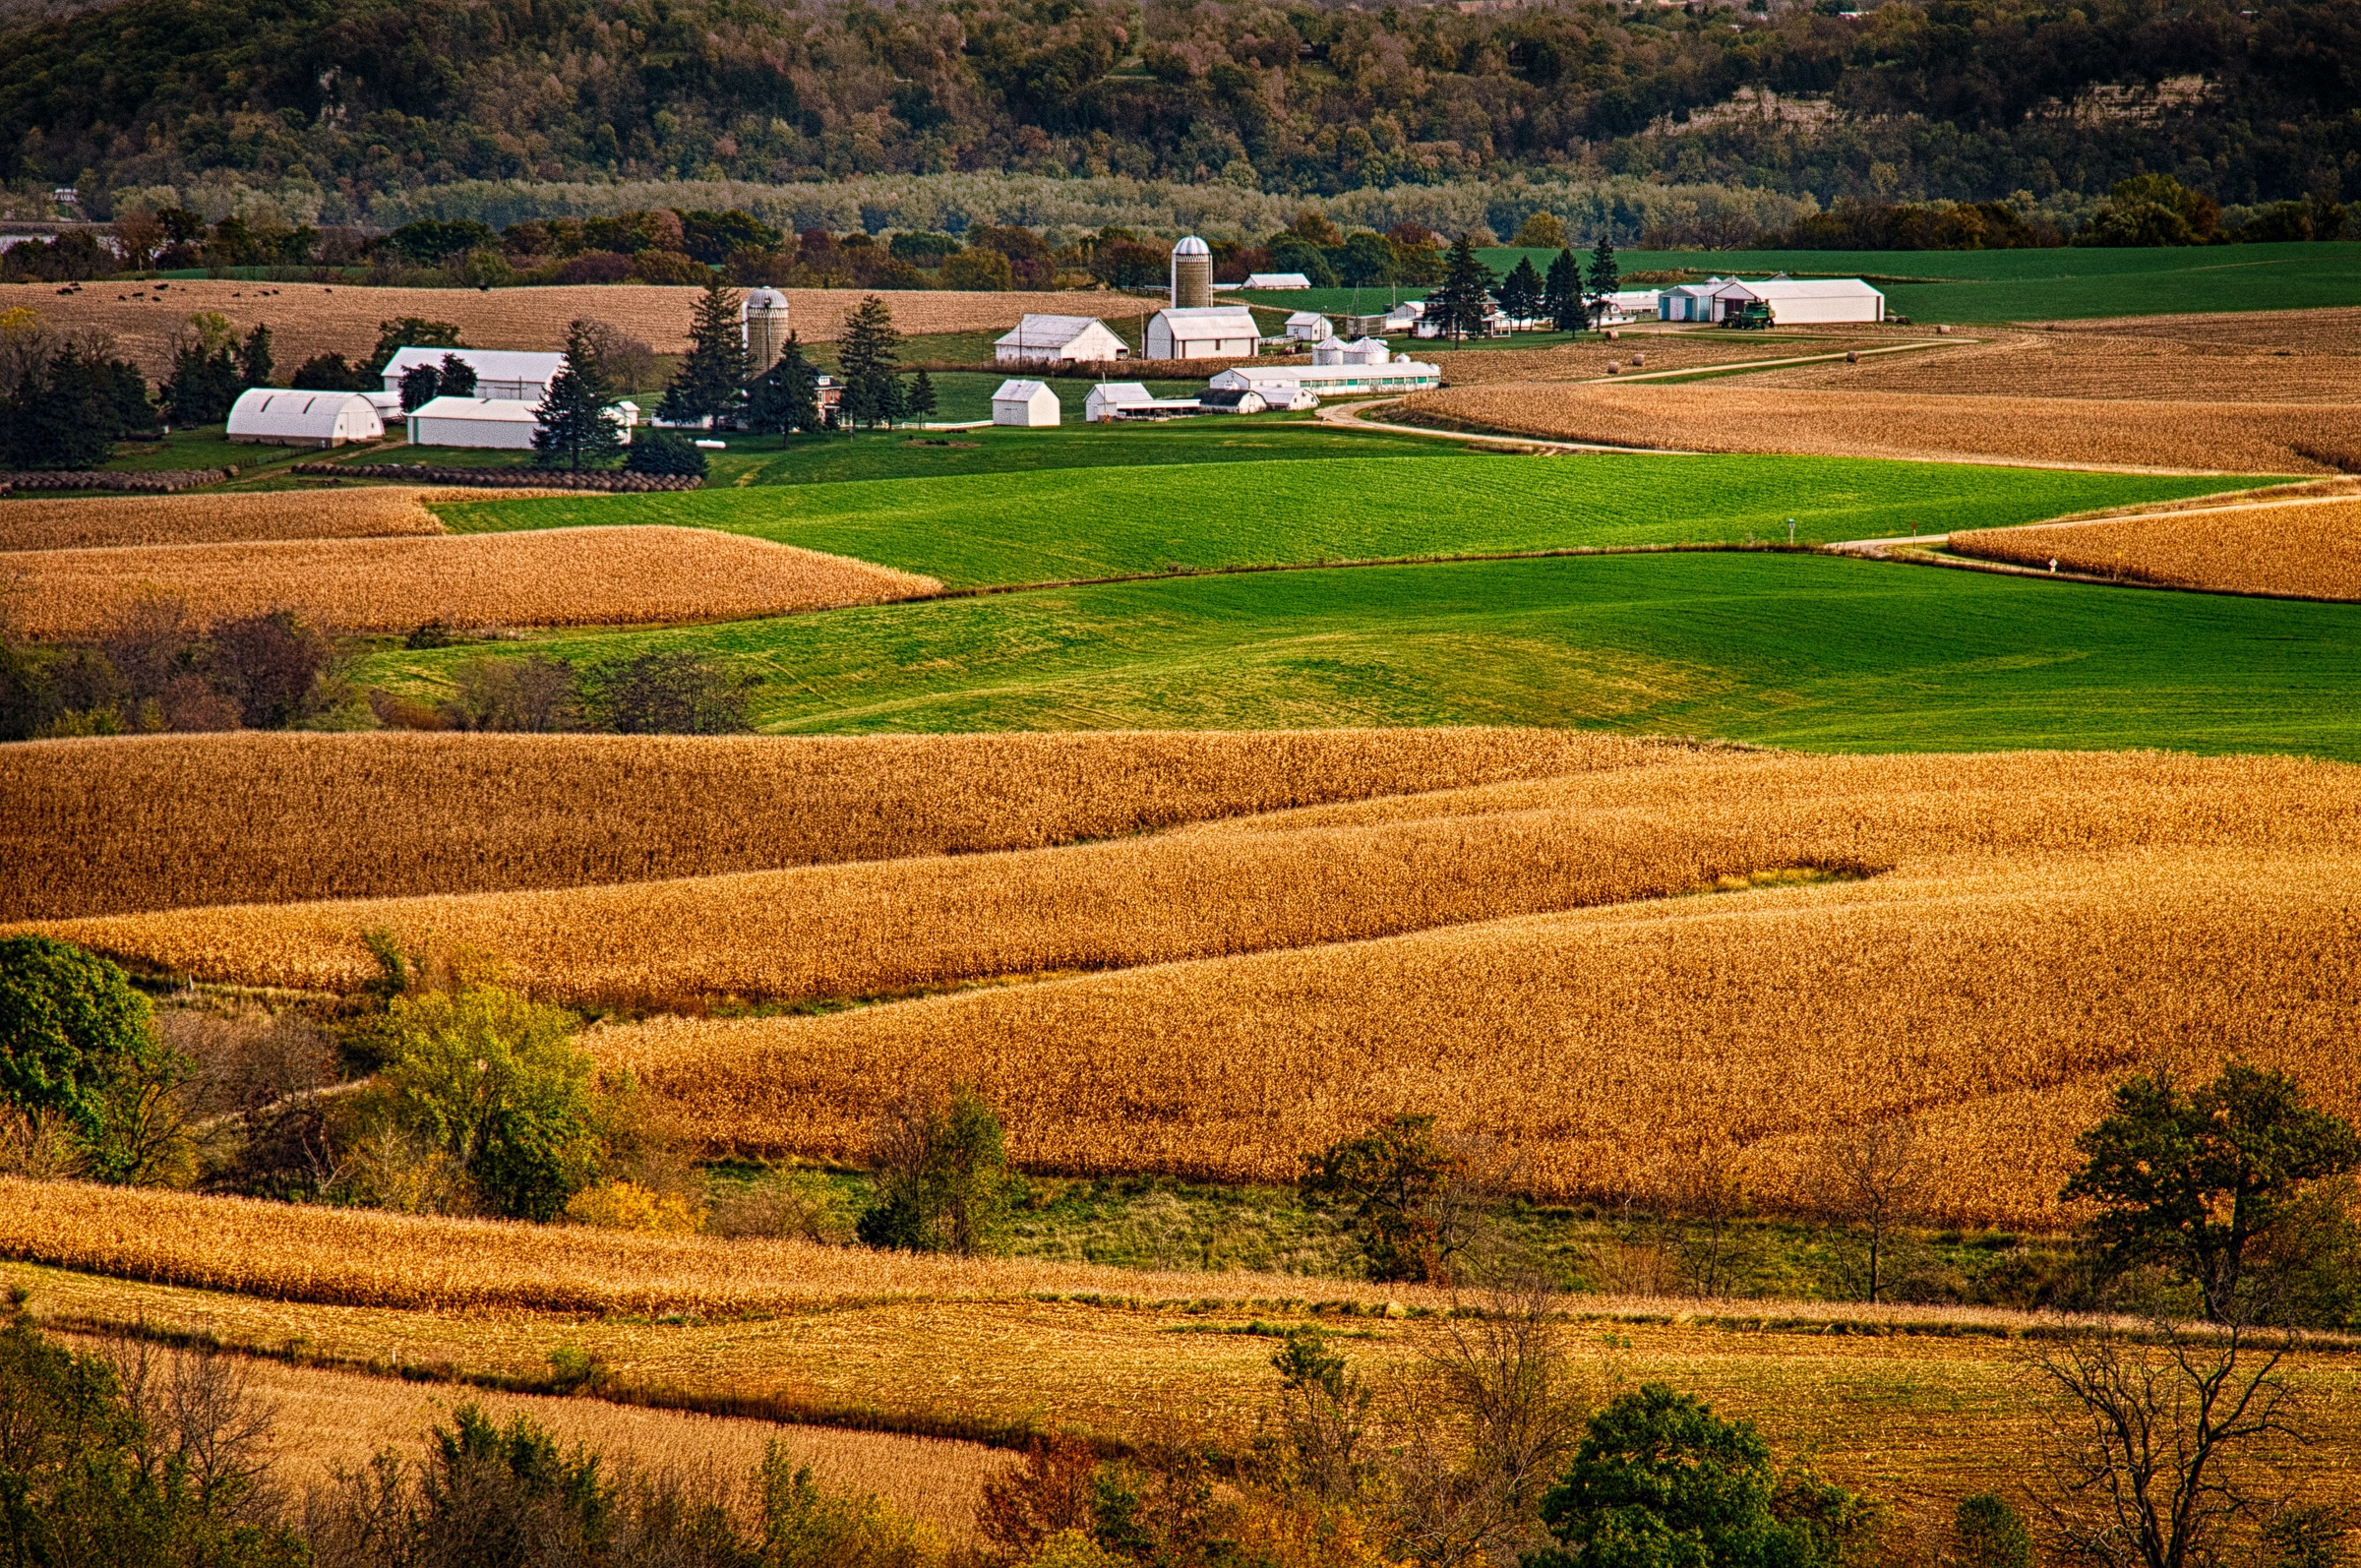 Farms and fields near Balltown, Iowa, just east of the Mississippi River.